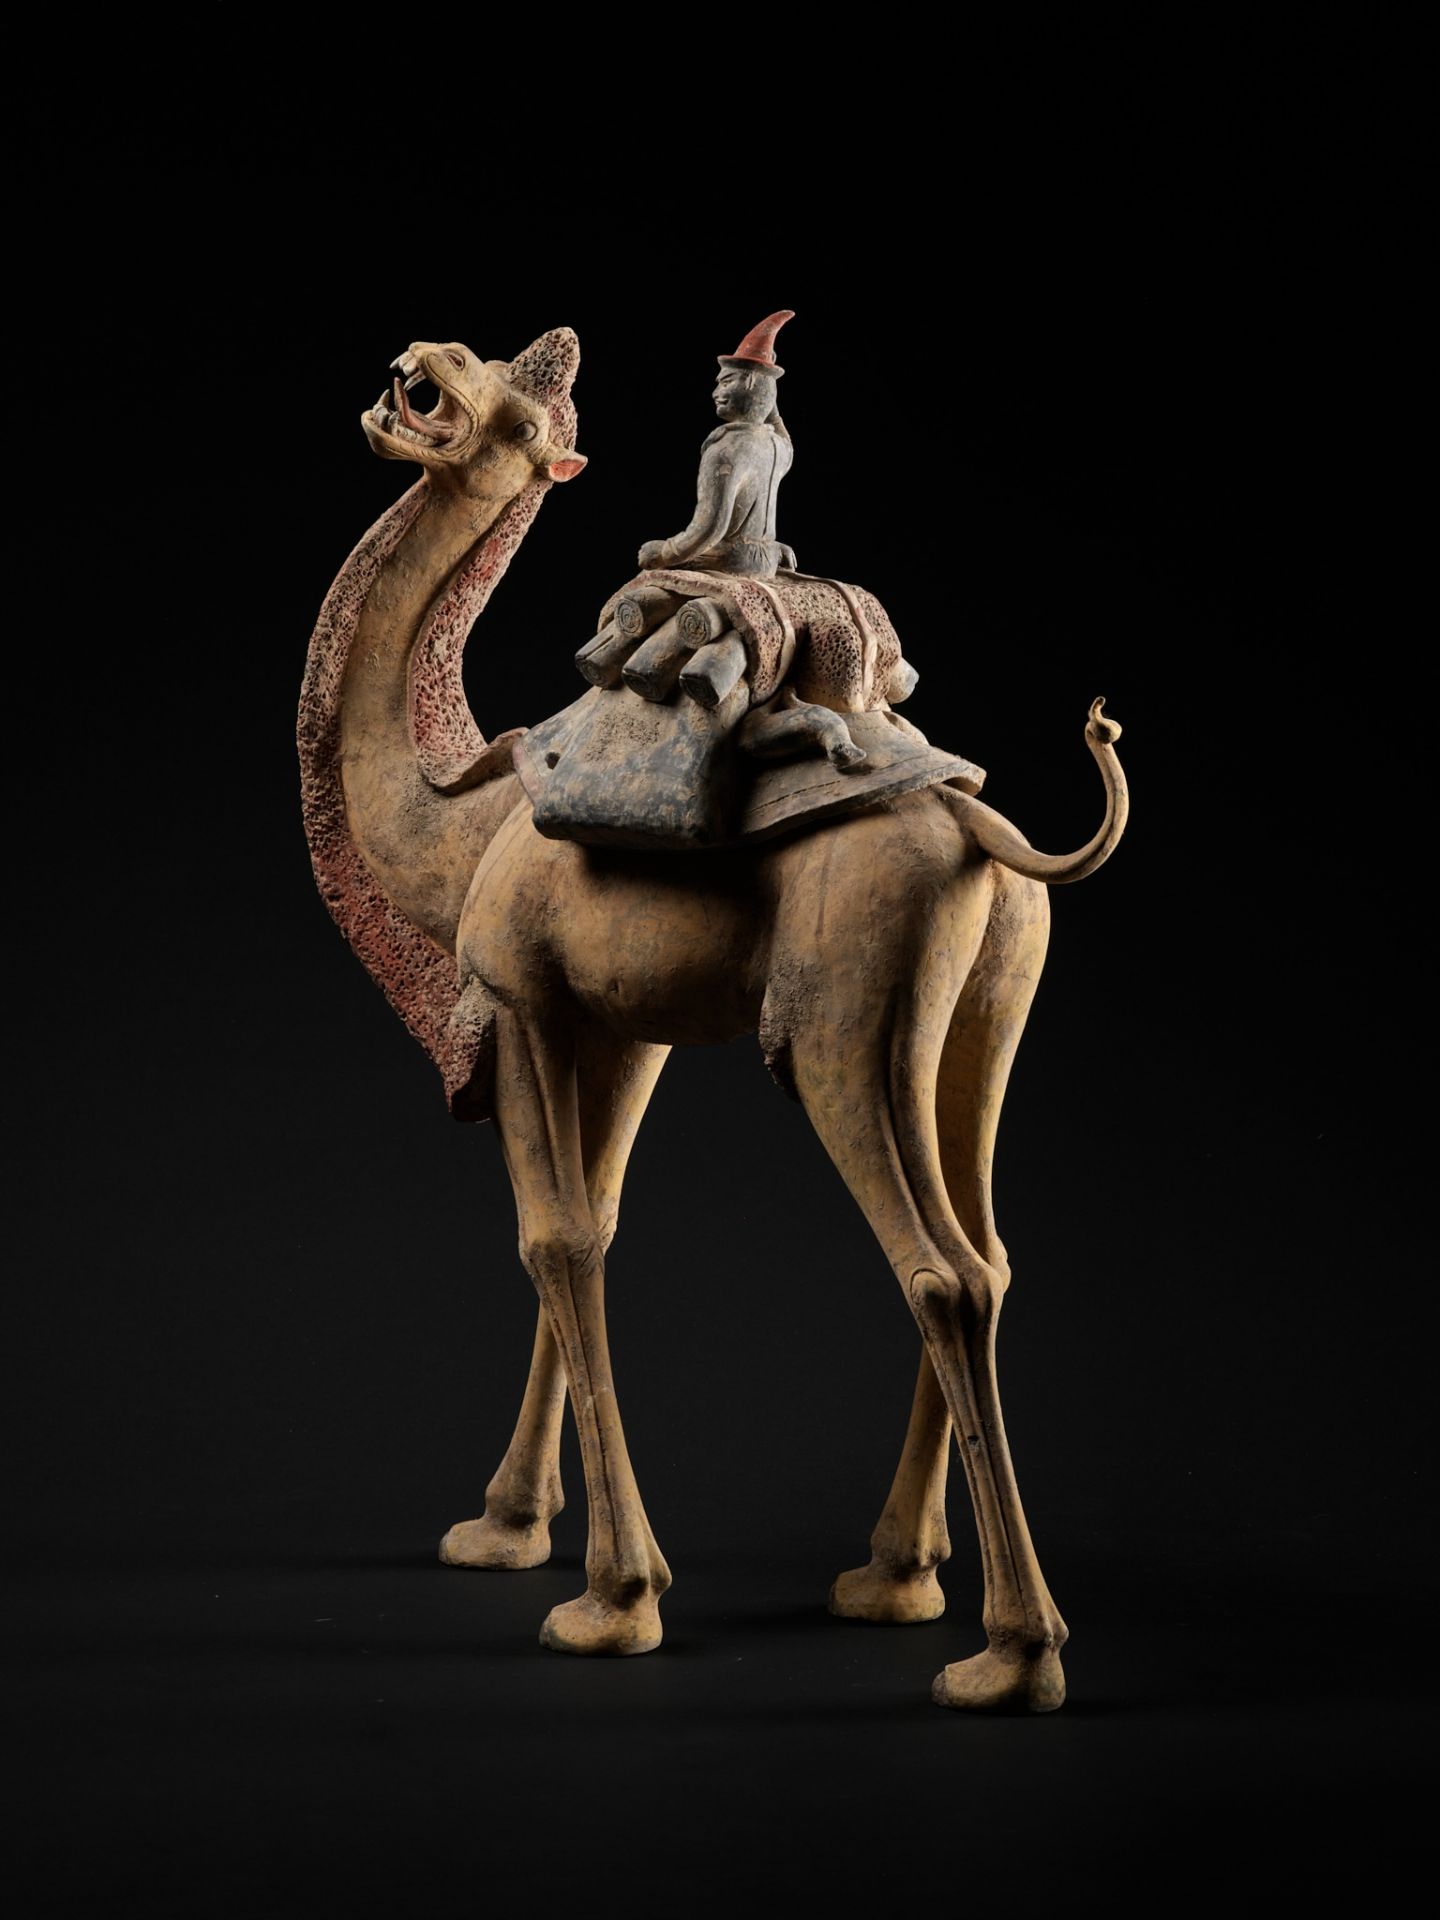 AN EXCEPTIONALLY LARGE PAINTED POTTERY FIGURE OF A BACTRIAN CAMEL AND A SOGDIAN RIDER, TANG DYNASTY - Image 8 of 12